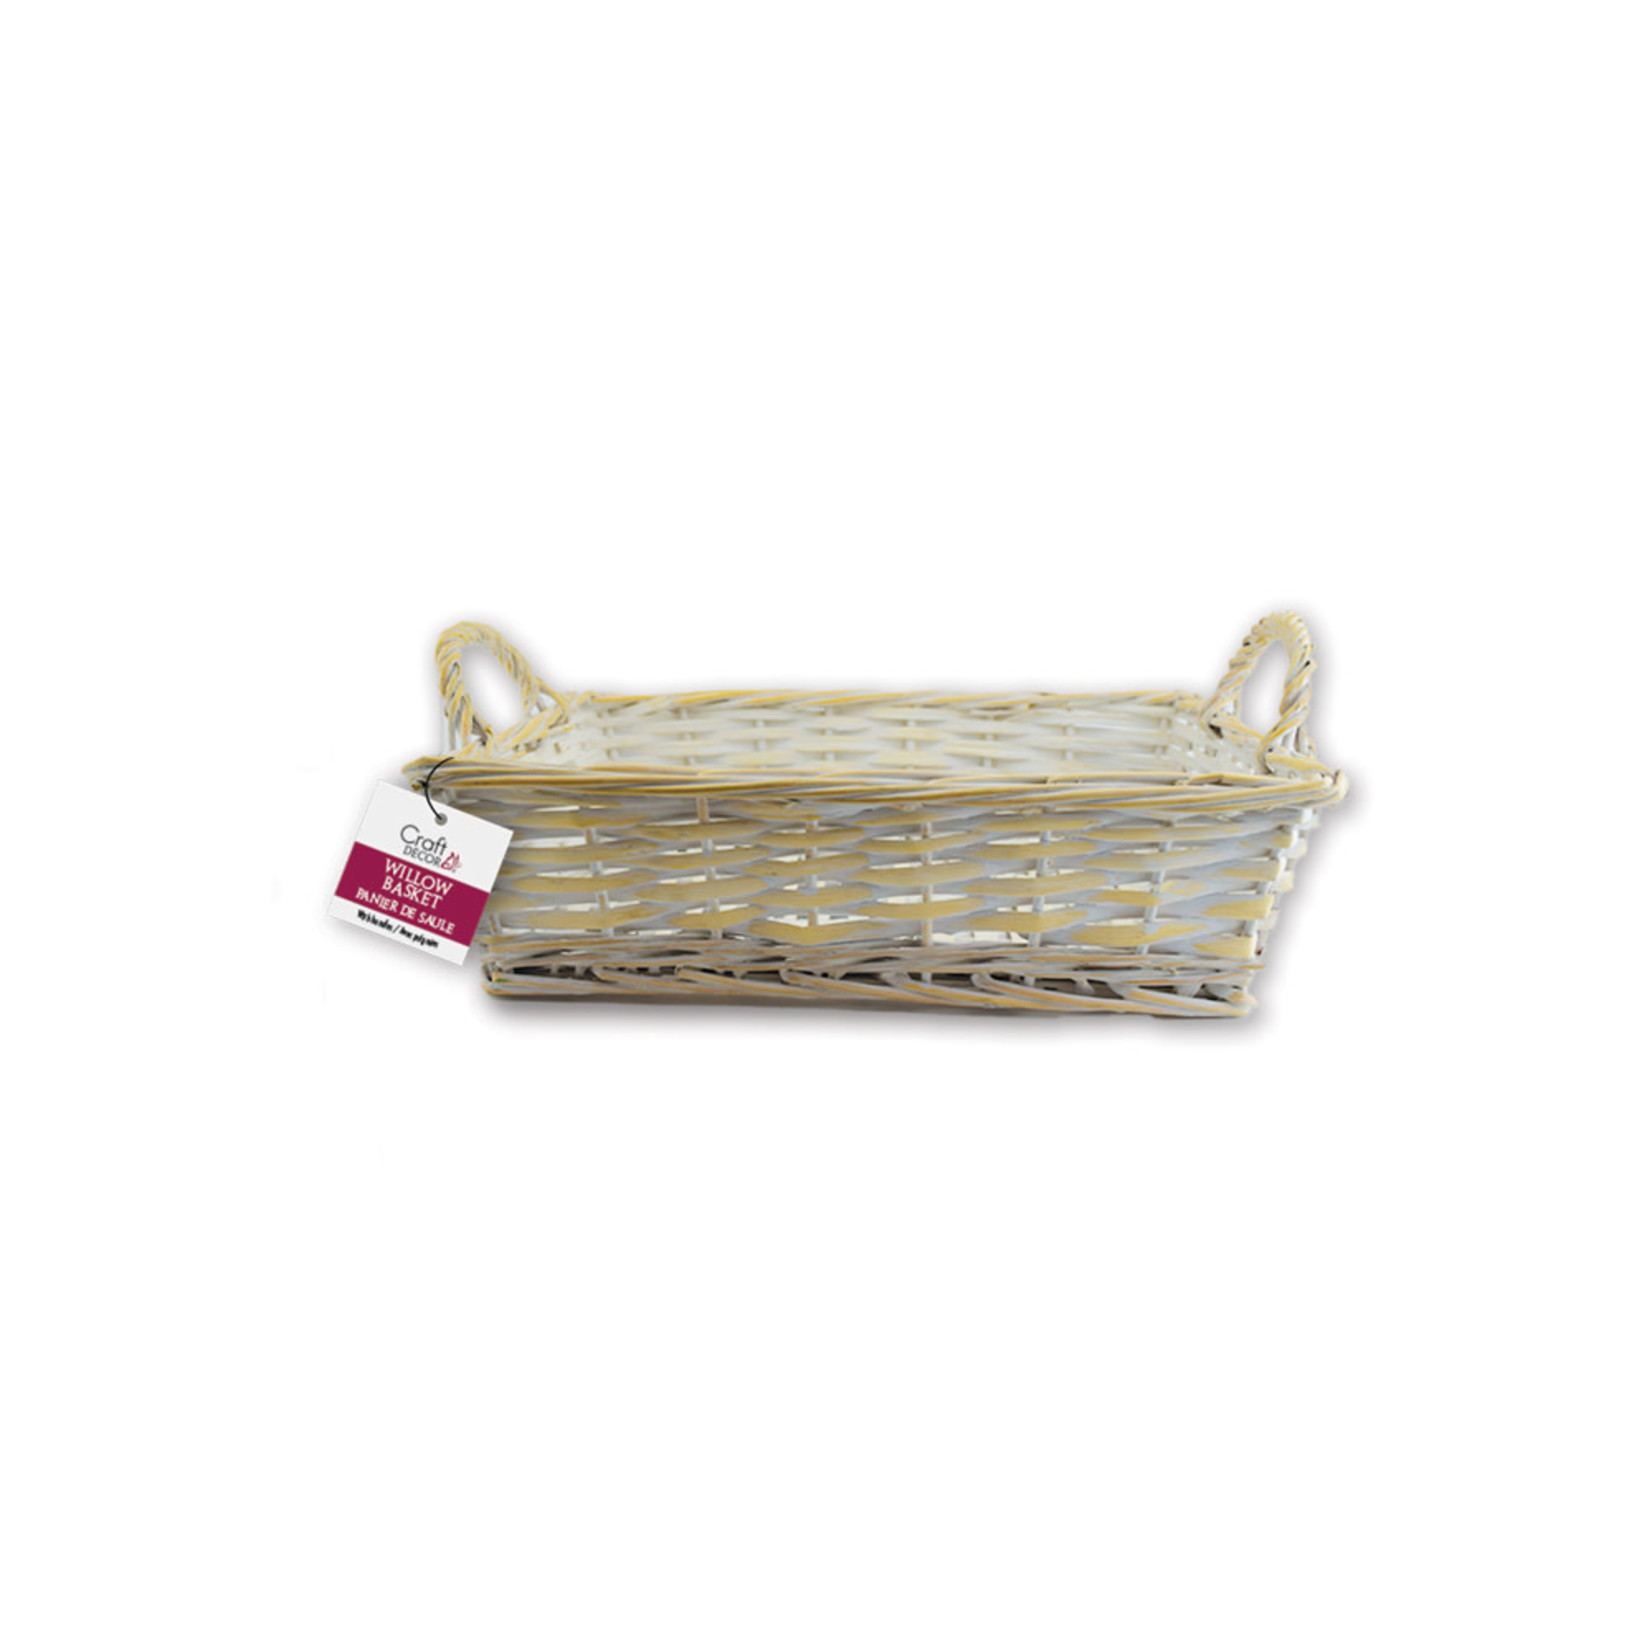 BASKET TRAY: 15IN X 11IN X 3.IN LRG WILLOW BLEACHED WITH HANDLES